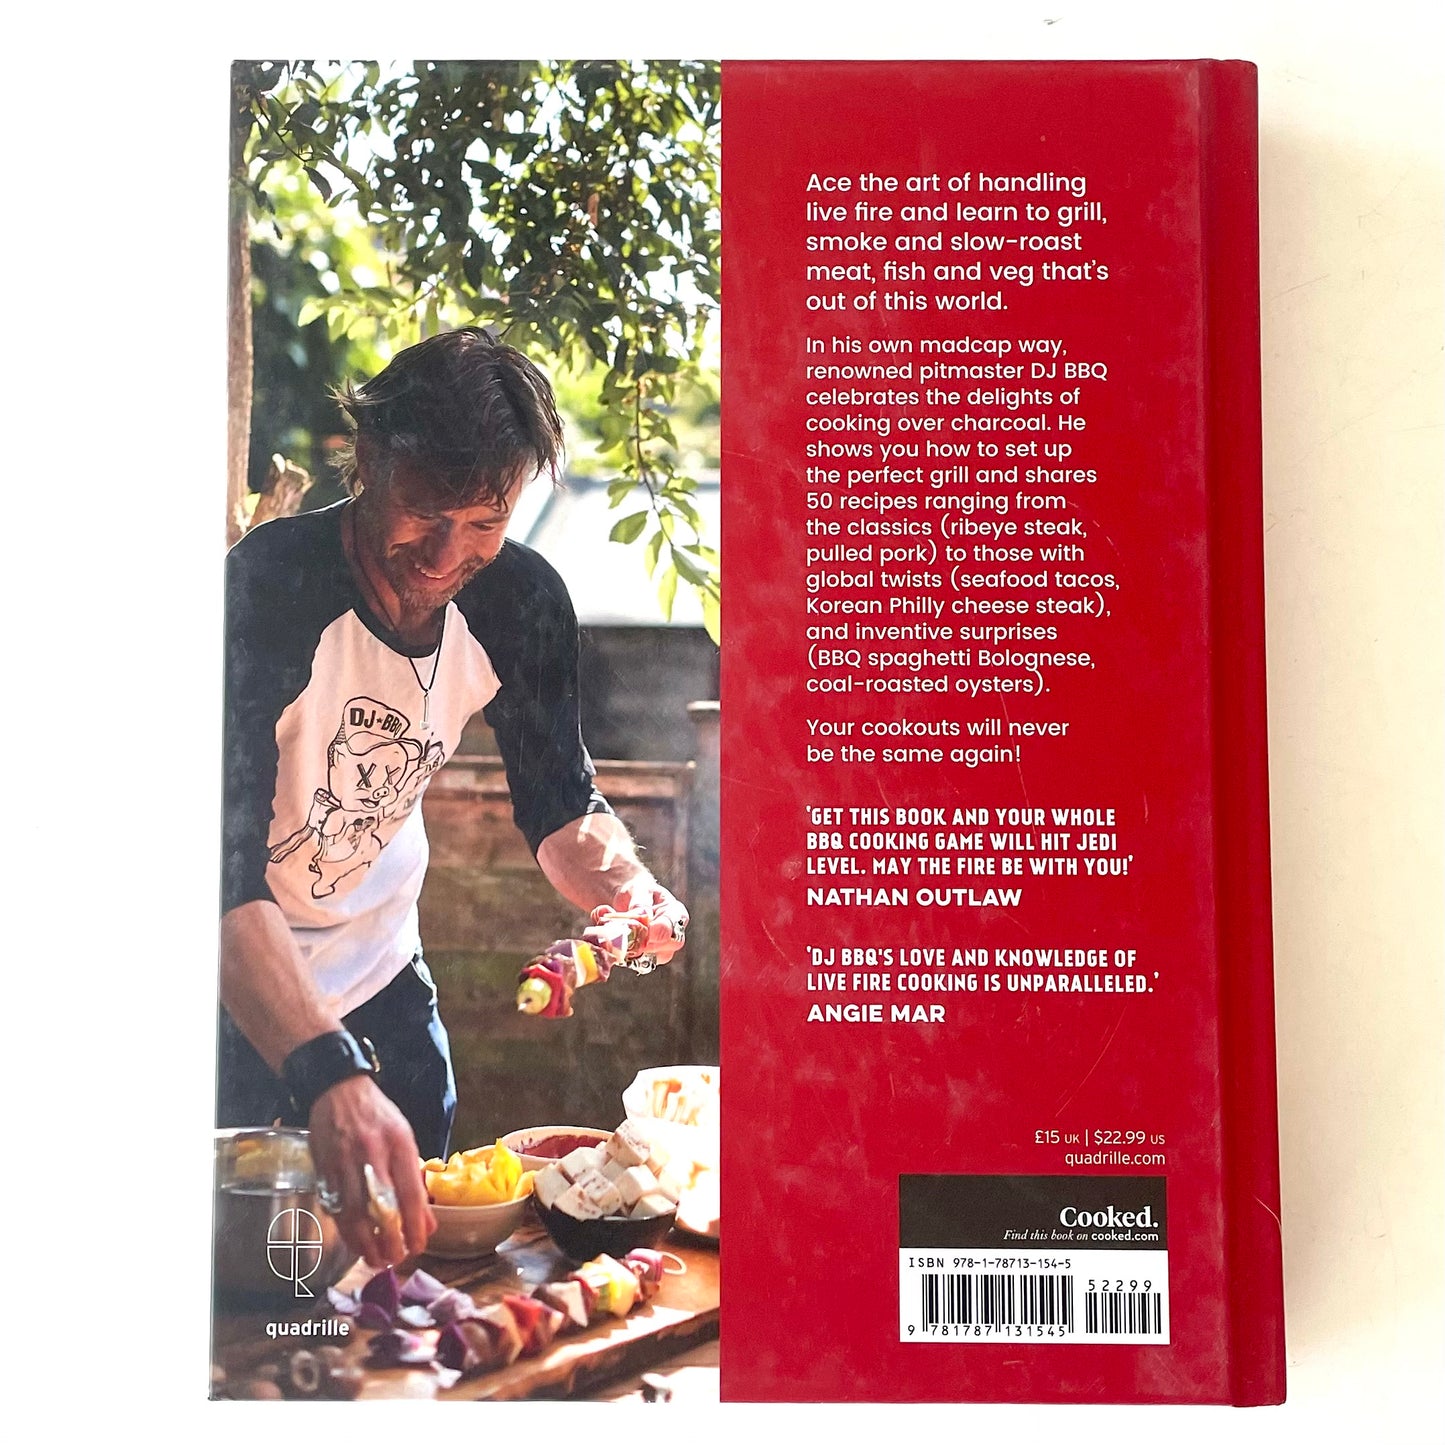 Fire Food: The Ultimate BBQ Cookbook by Christian Stevenson